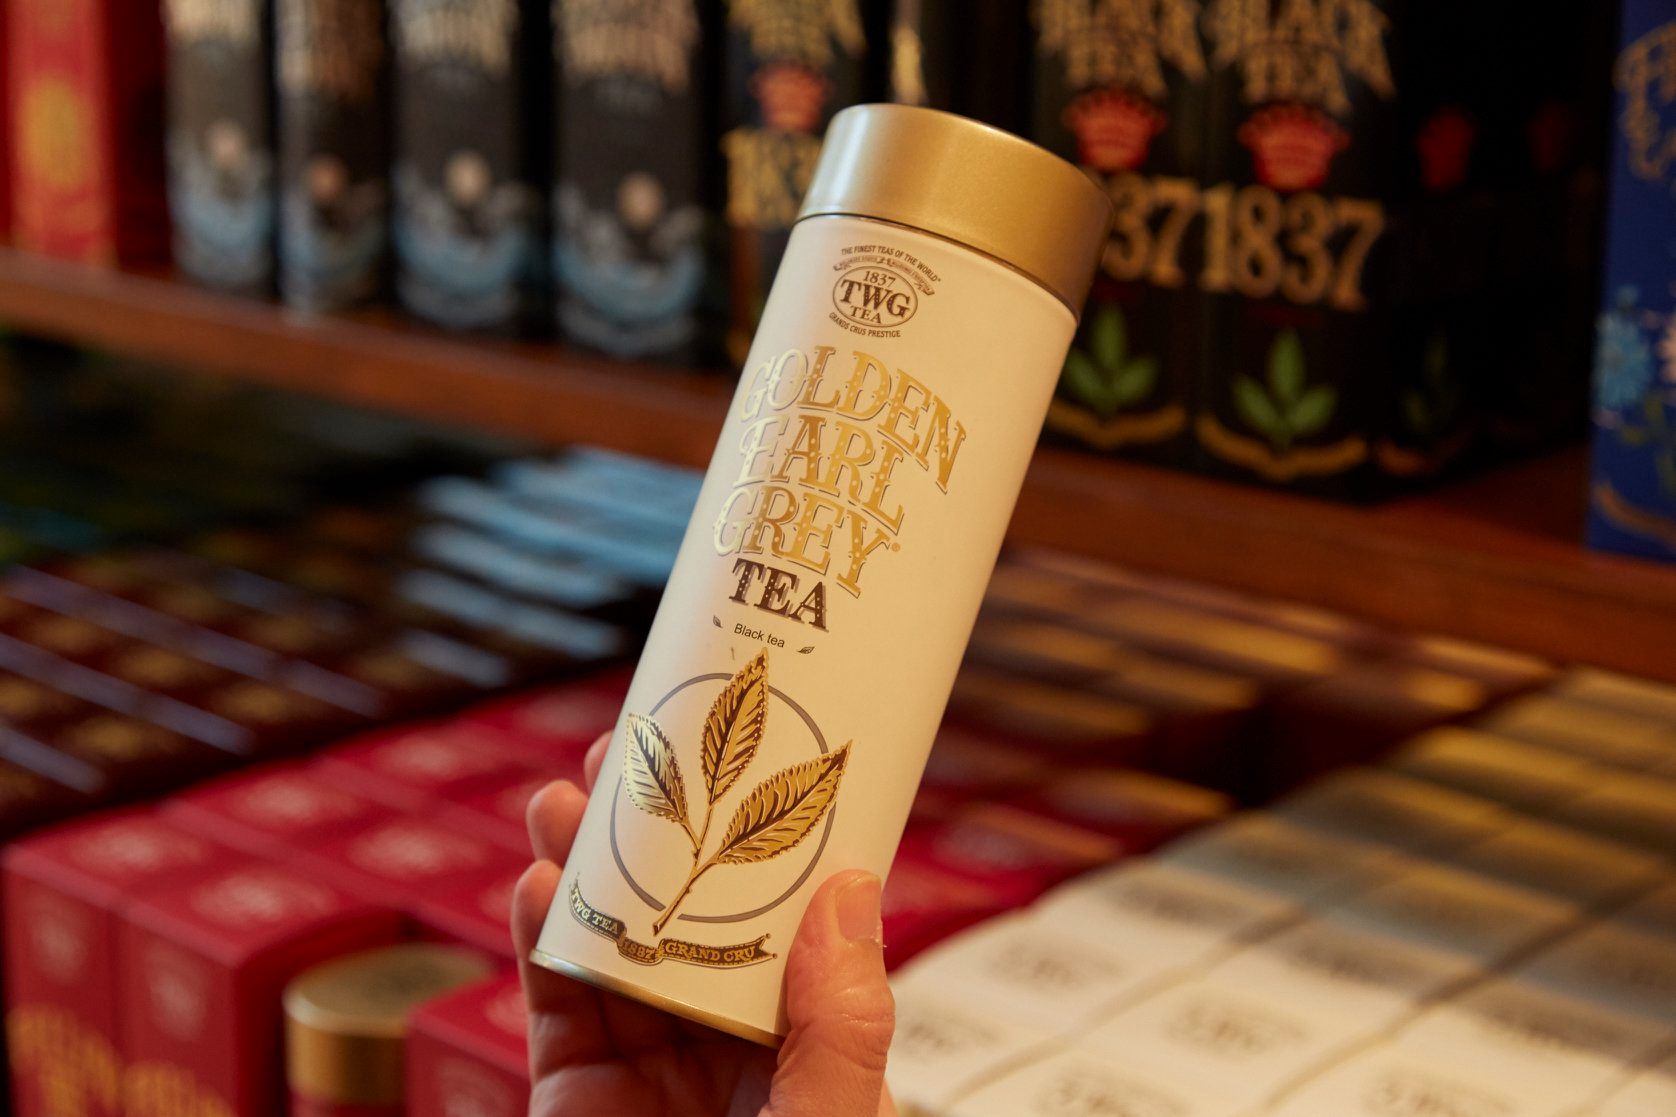 #NowInfusing: The gold tips of this highly sought after black tea are sun-dried and oxidized naturally, produced in extremely limited quantity and are almost impossible to find. Blended with an extraordinary bergamot, this tea astonishes with a malty, honeyed flavor. Shop now on TWGTea.com!